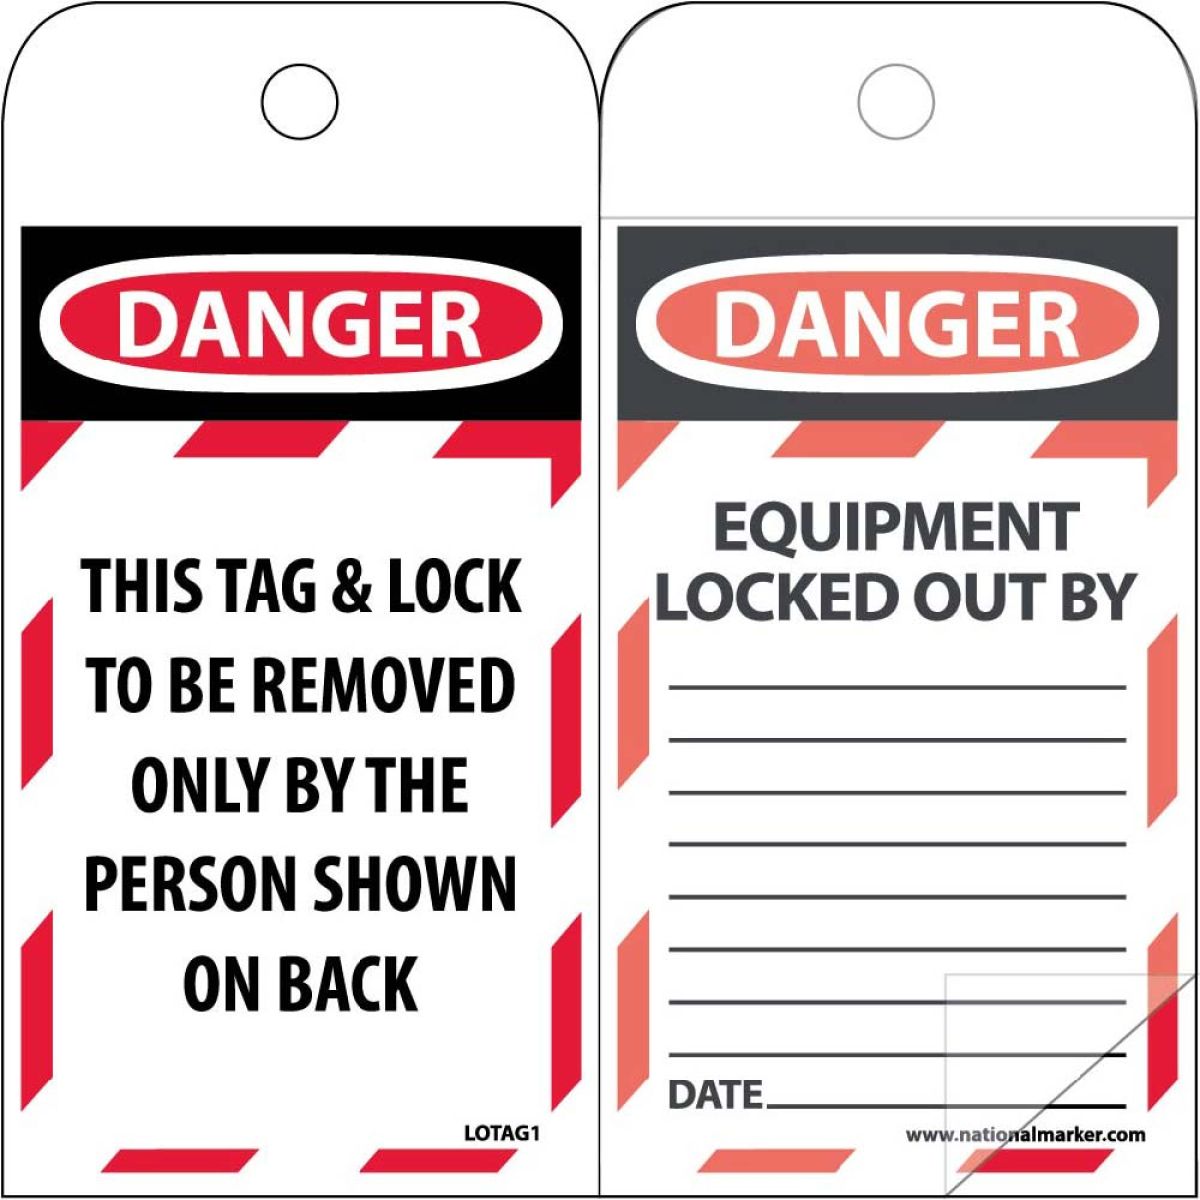 DANGER THIS TAG & LOCK TO BE REMOVED ONLY BY THE PERSON SHOWN ON BACK TAG